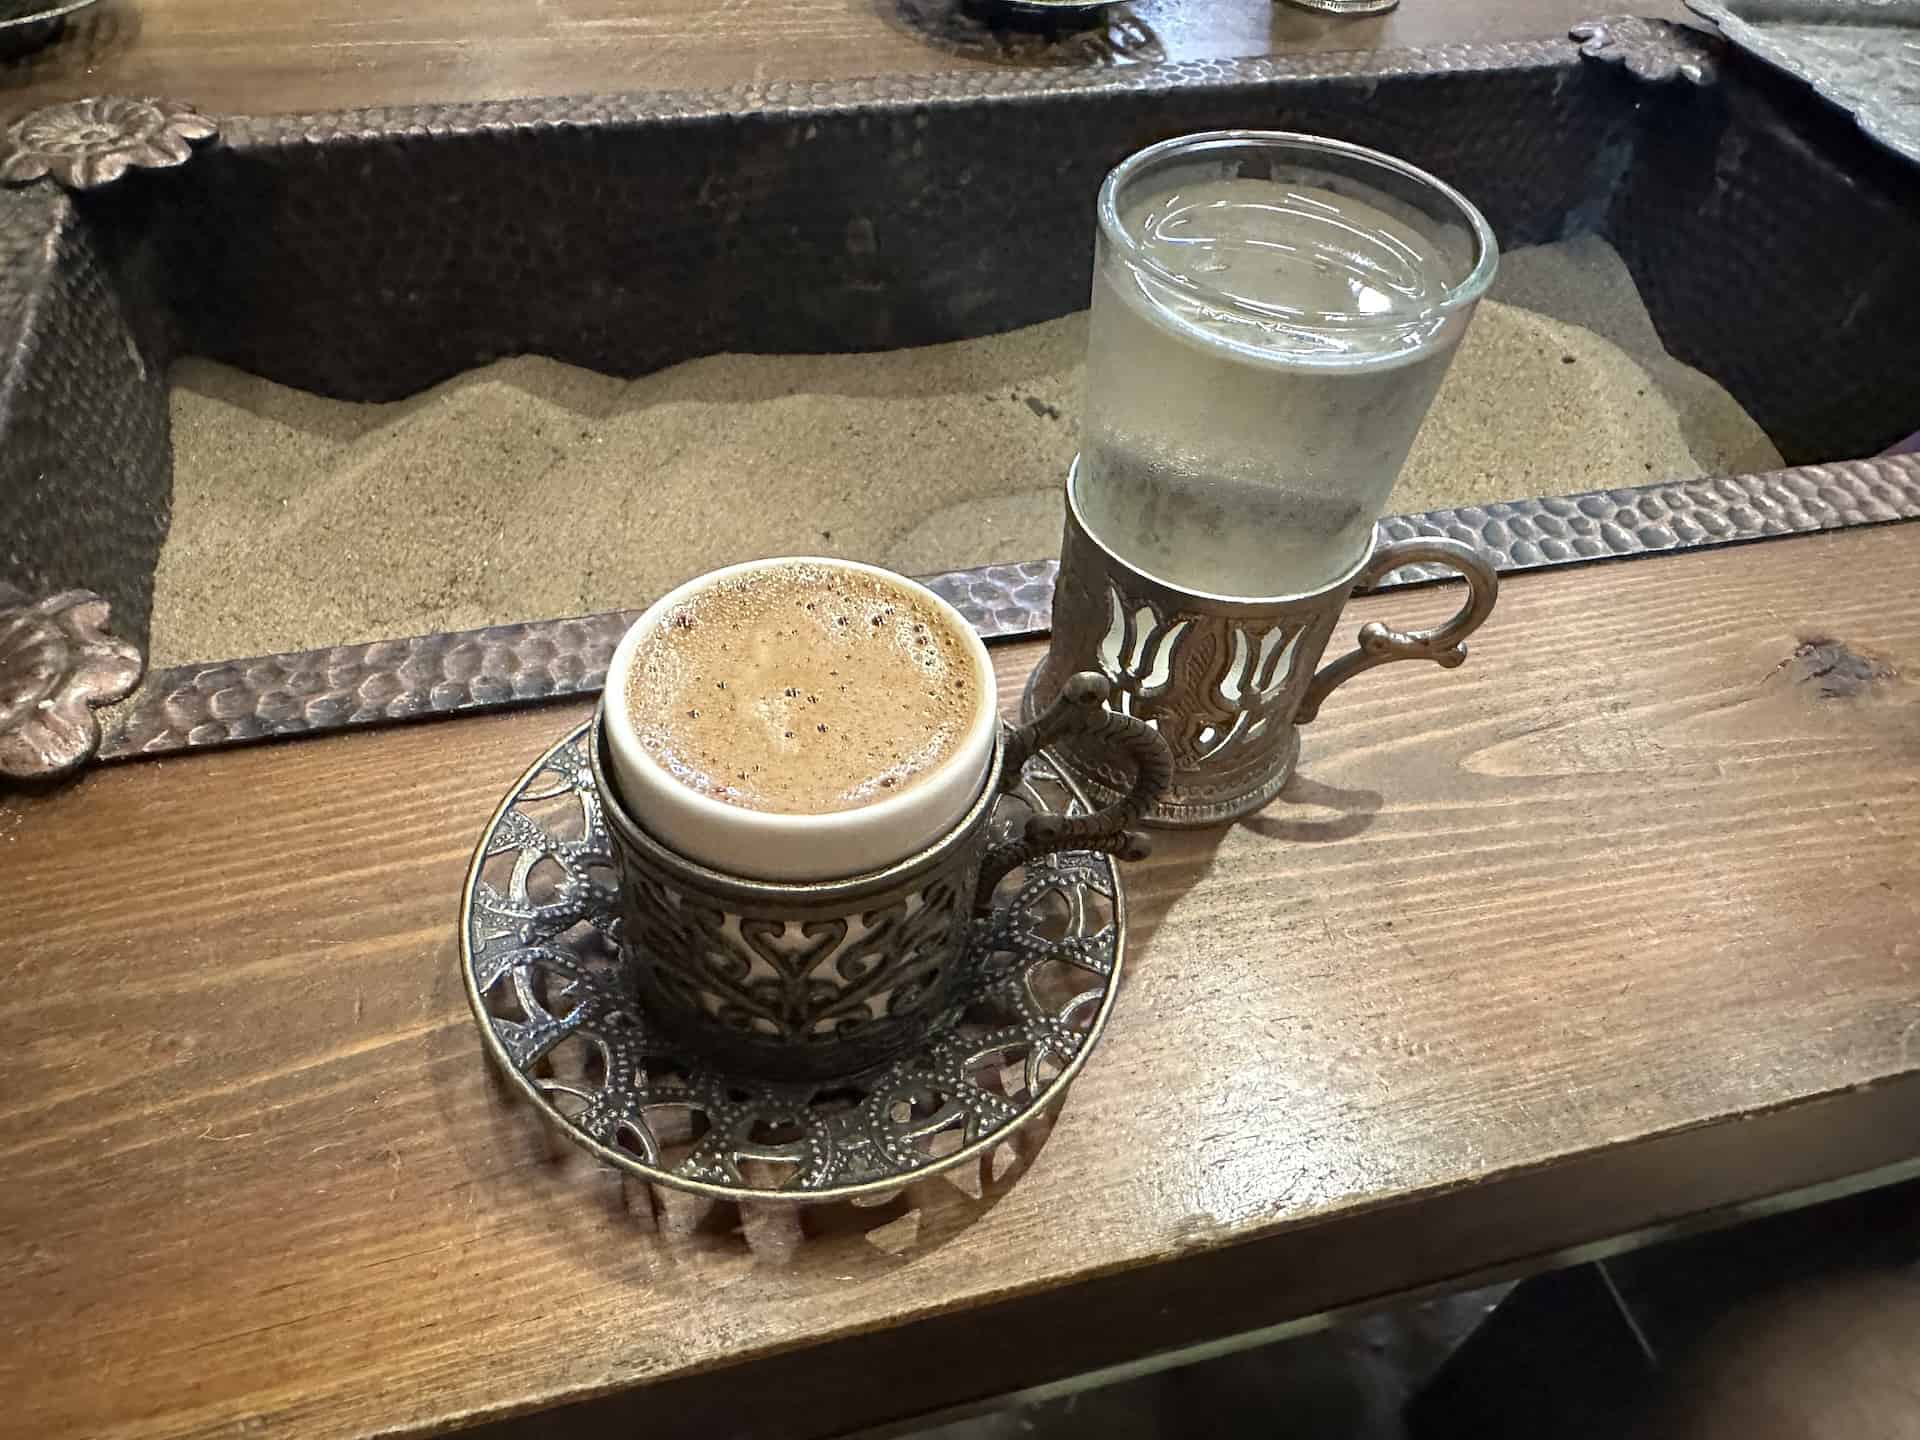 Turkish coffee cooked in hot sand at Fındık Café